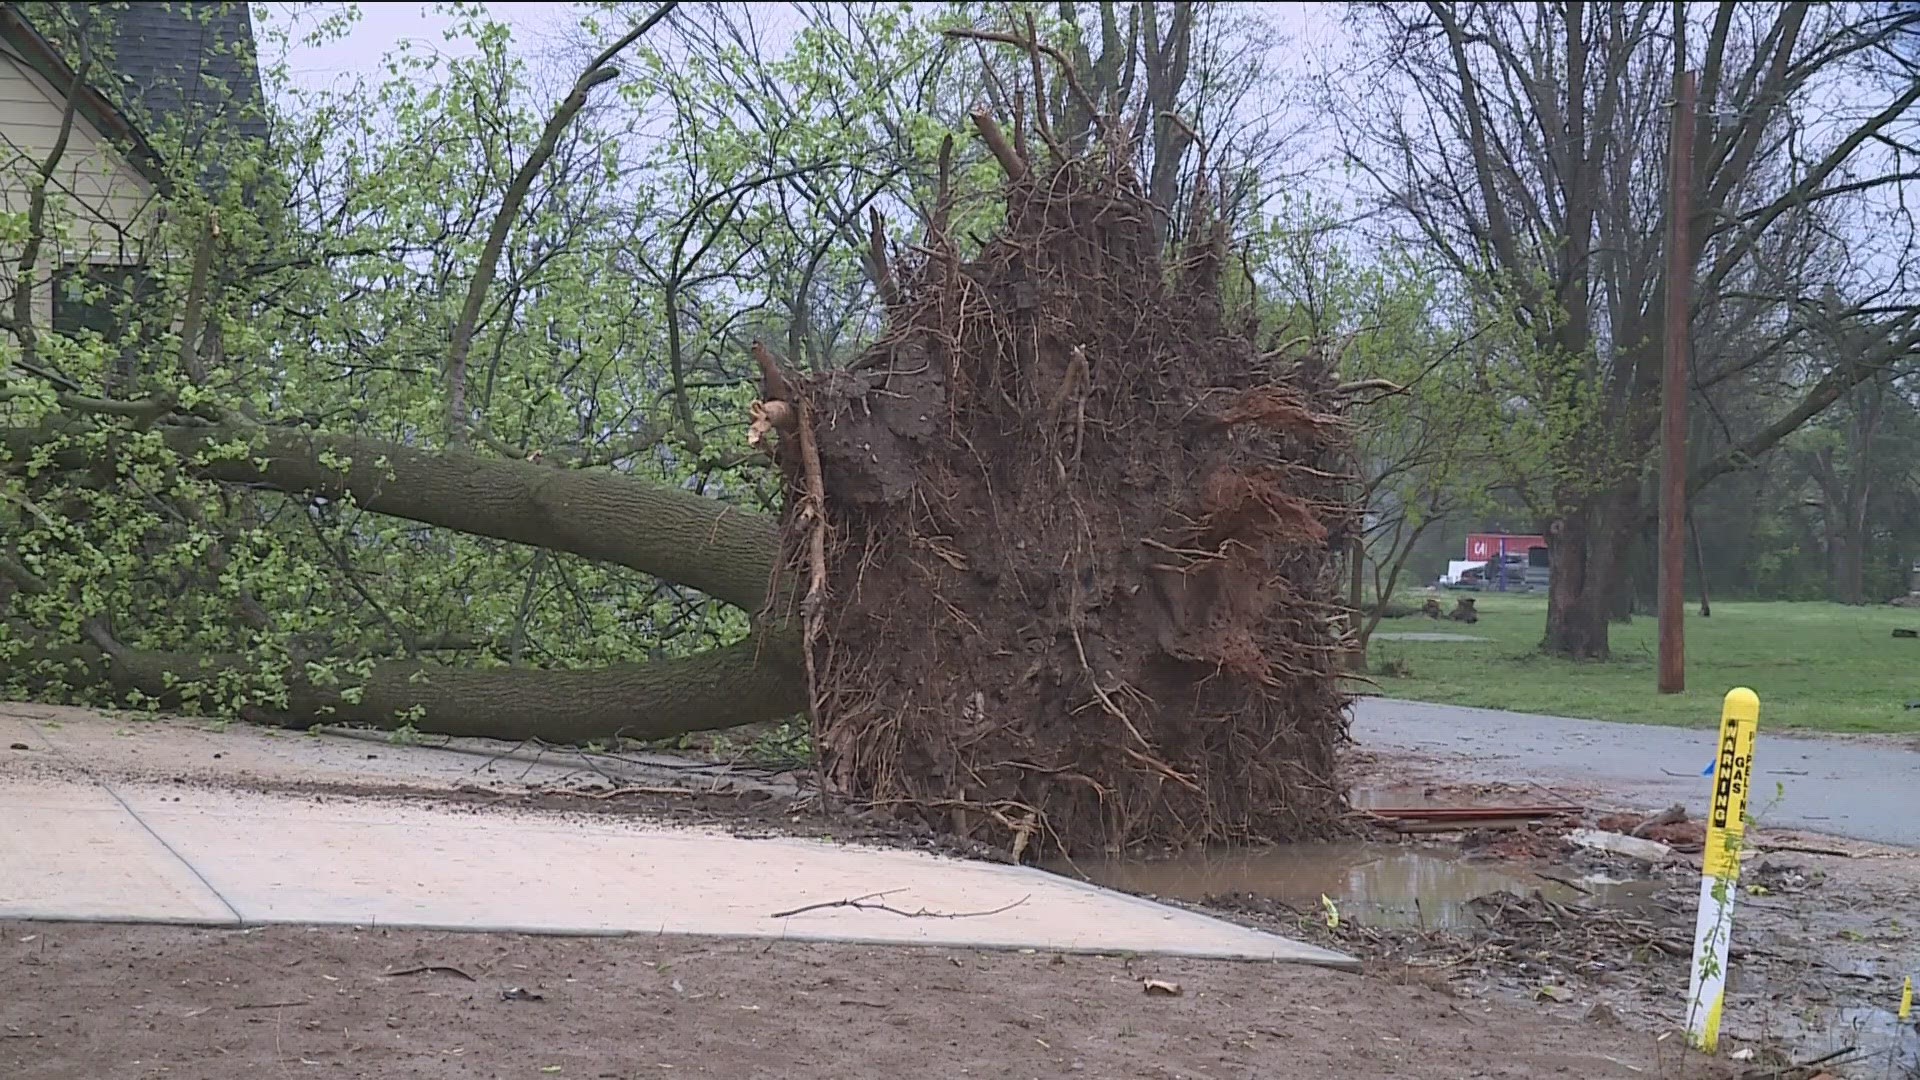 Watch the footage of damage caused by overnight storms in Bentonville.